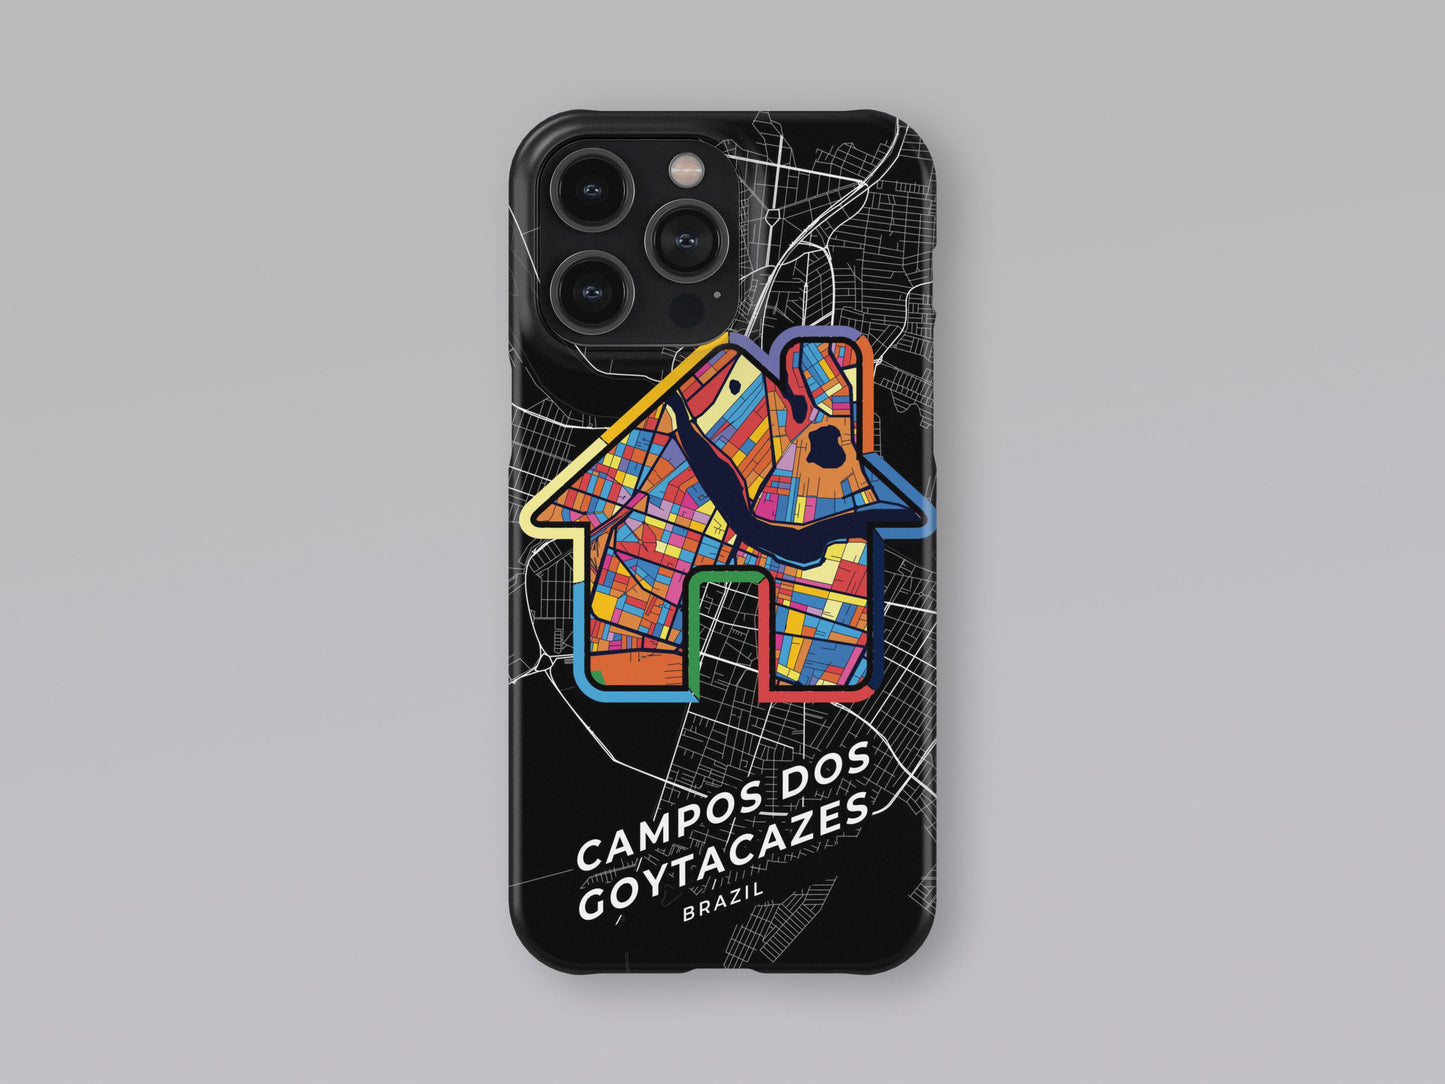 Campos Dos Goytacazes Brazil slim phone case with colorful icon. Birthday, wedding or housewarming gift. Couple match cases. 3